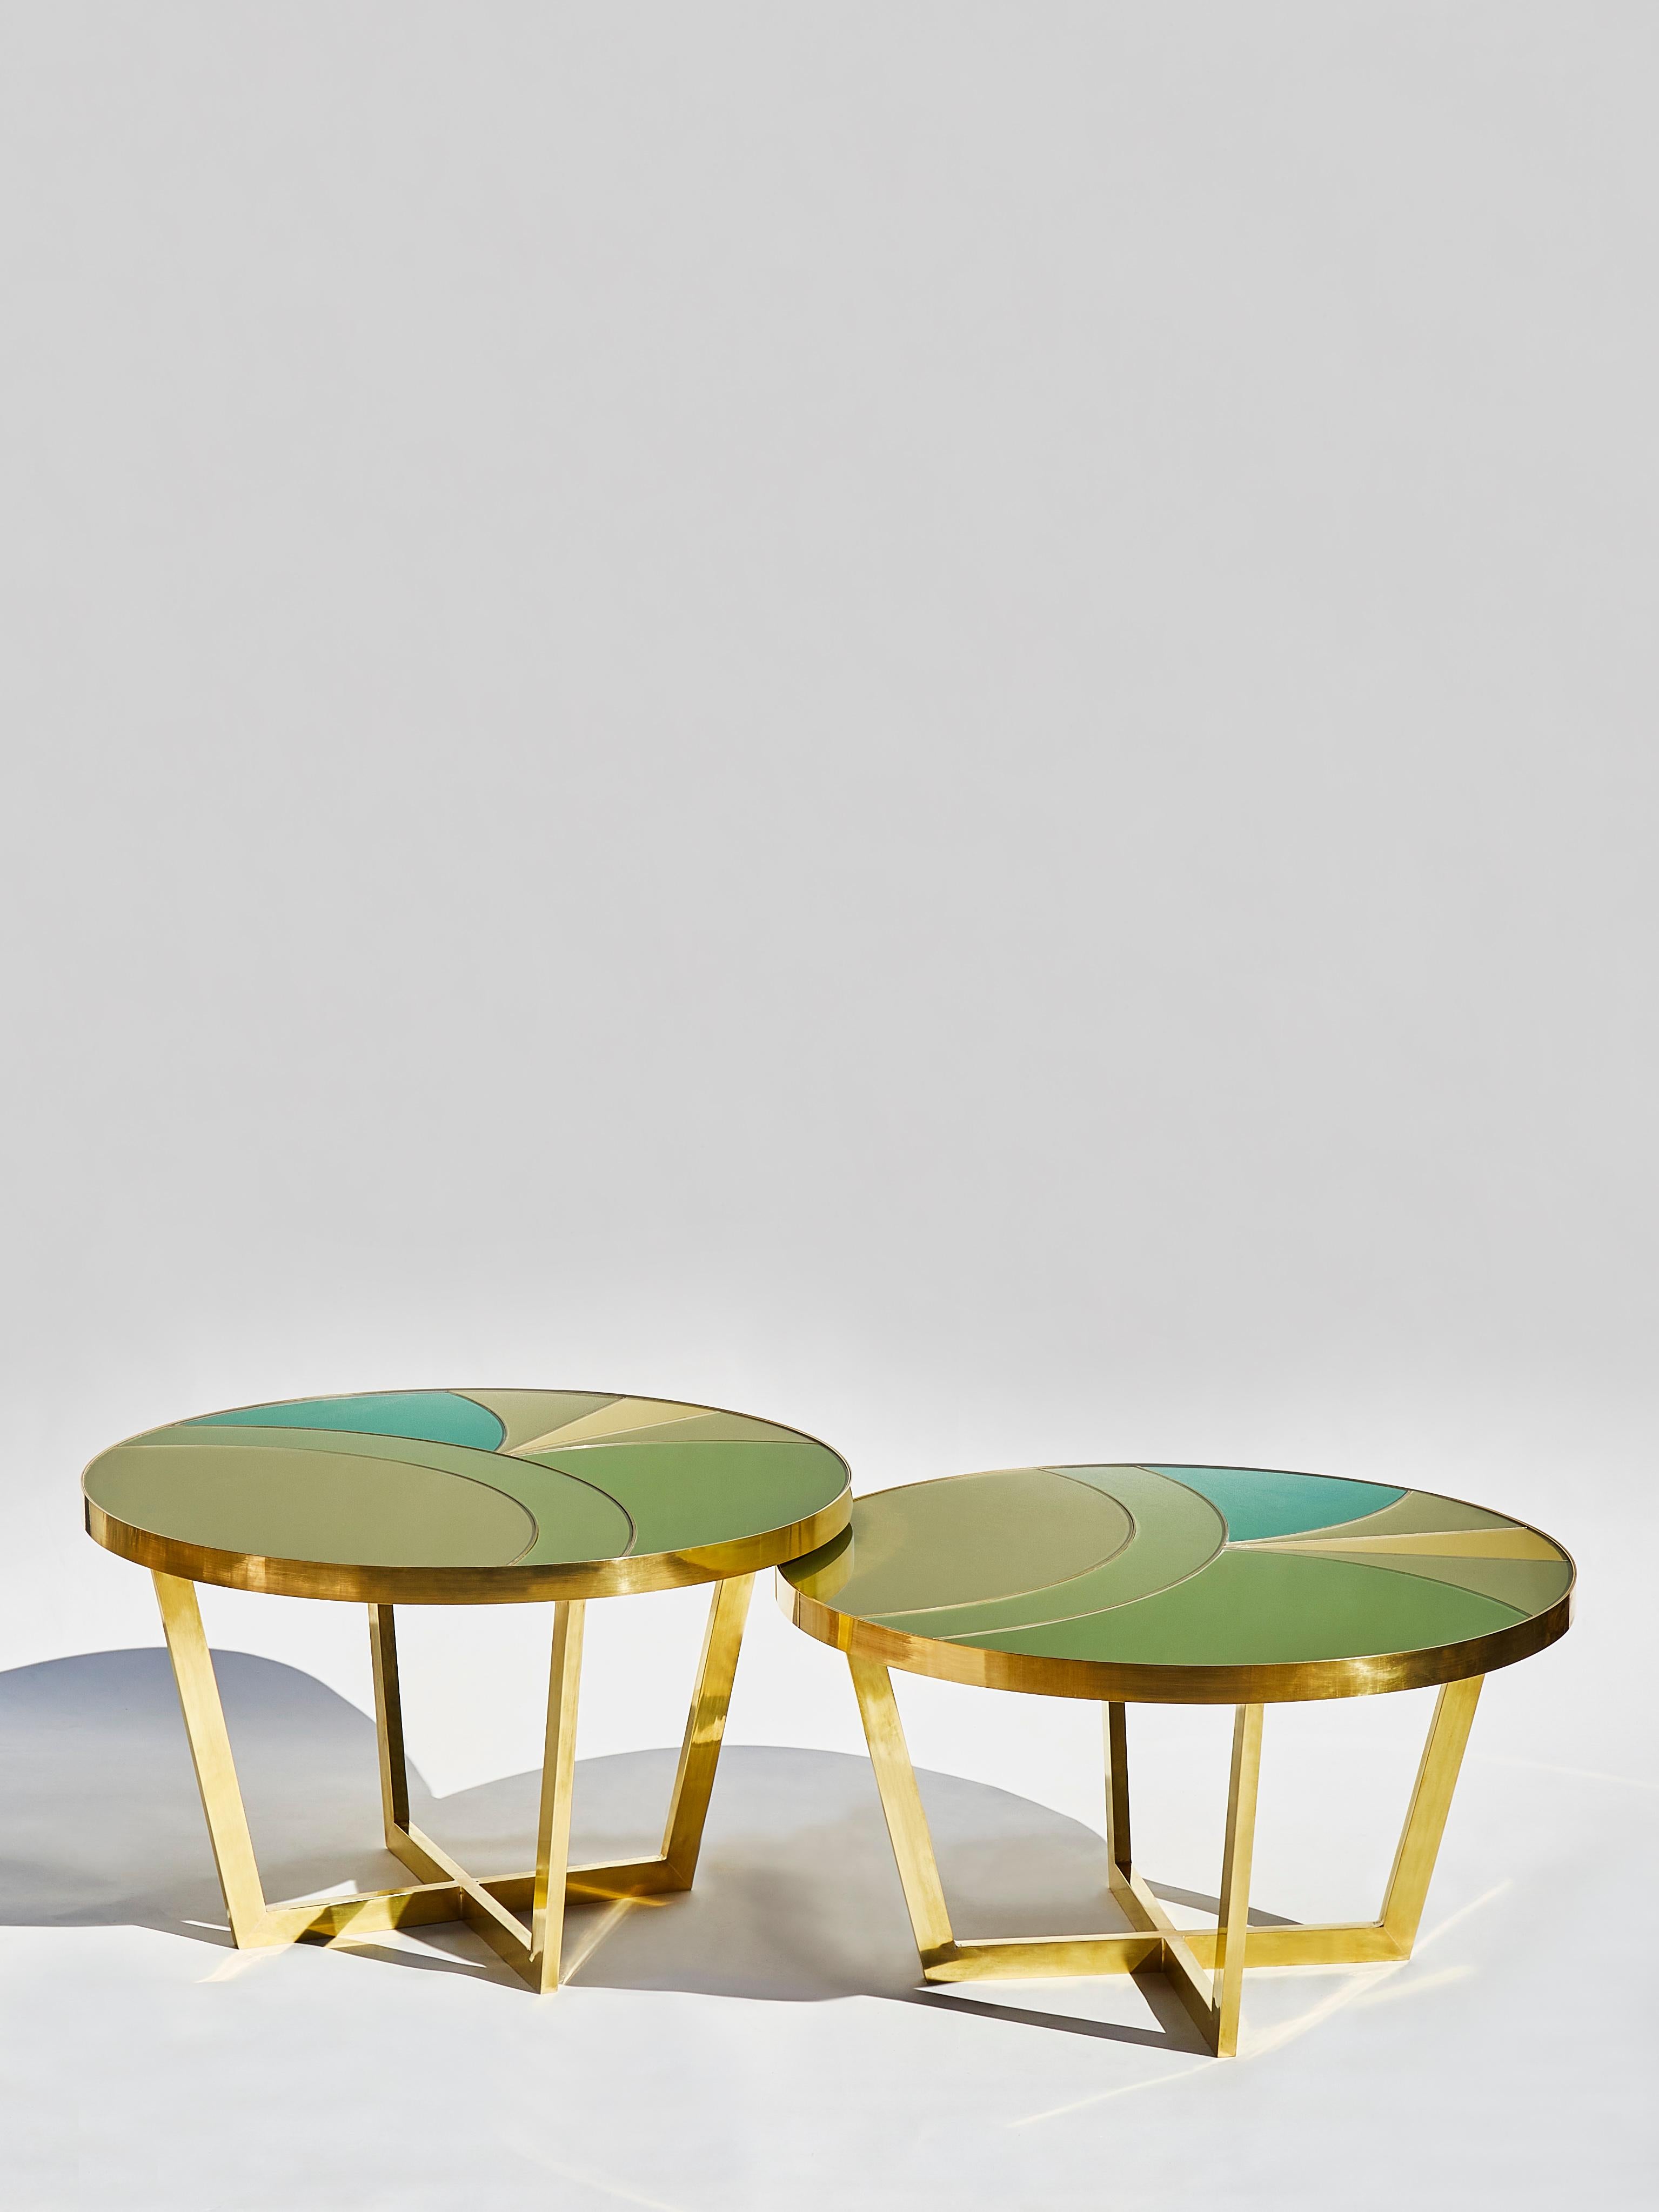 Pair of coffee tables in brass with a top made of Marquetry of tainted mirrors with brass inlays.
Each coffee table has a different height in order to slide one under the other.
Creation by Studio Glustin.

Dimensions:
Diameter 85 x height 52